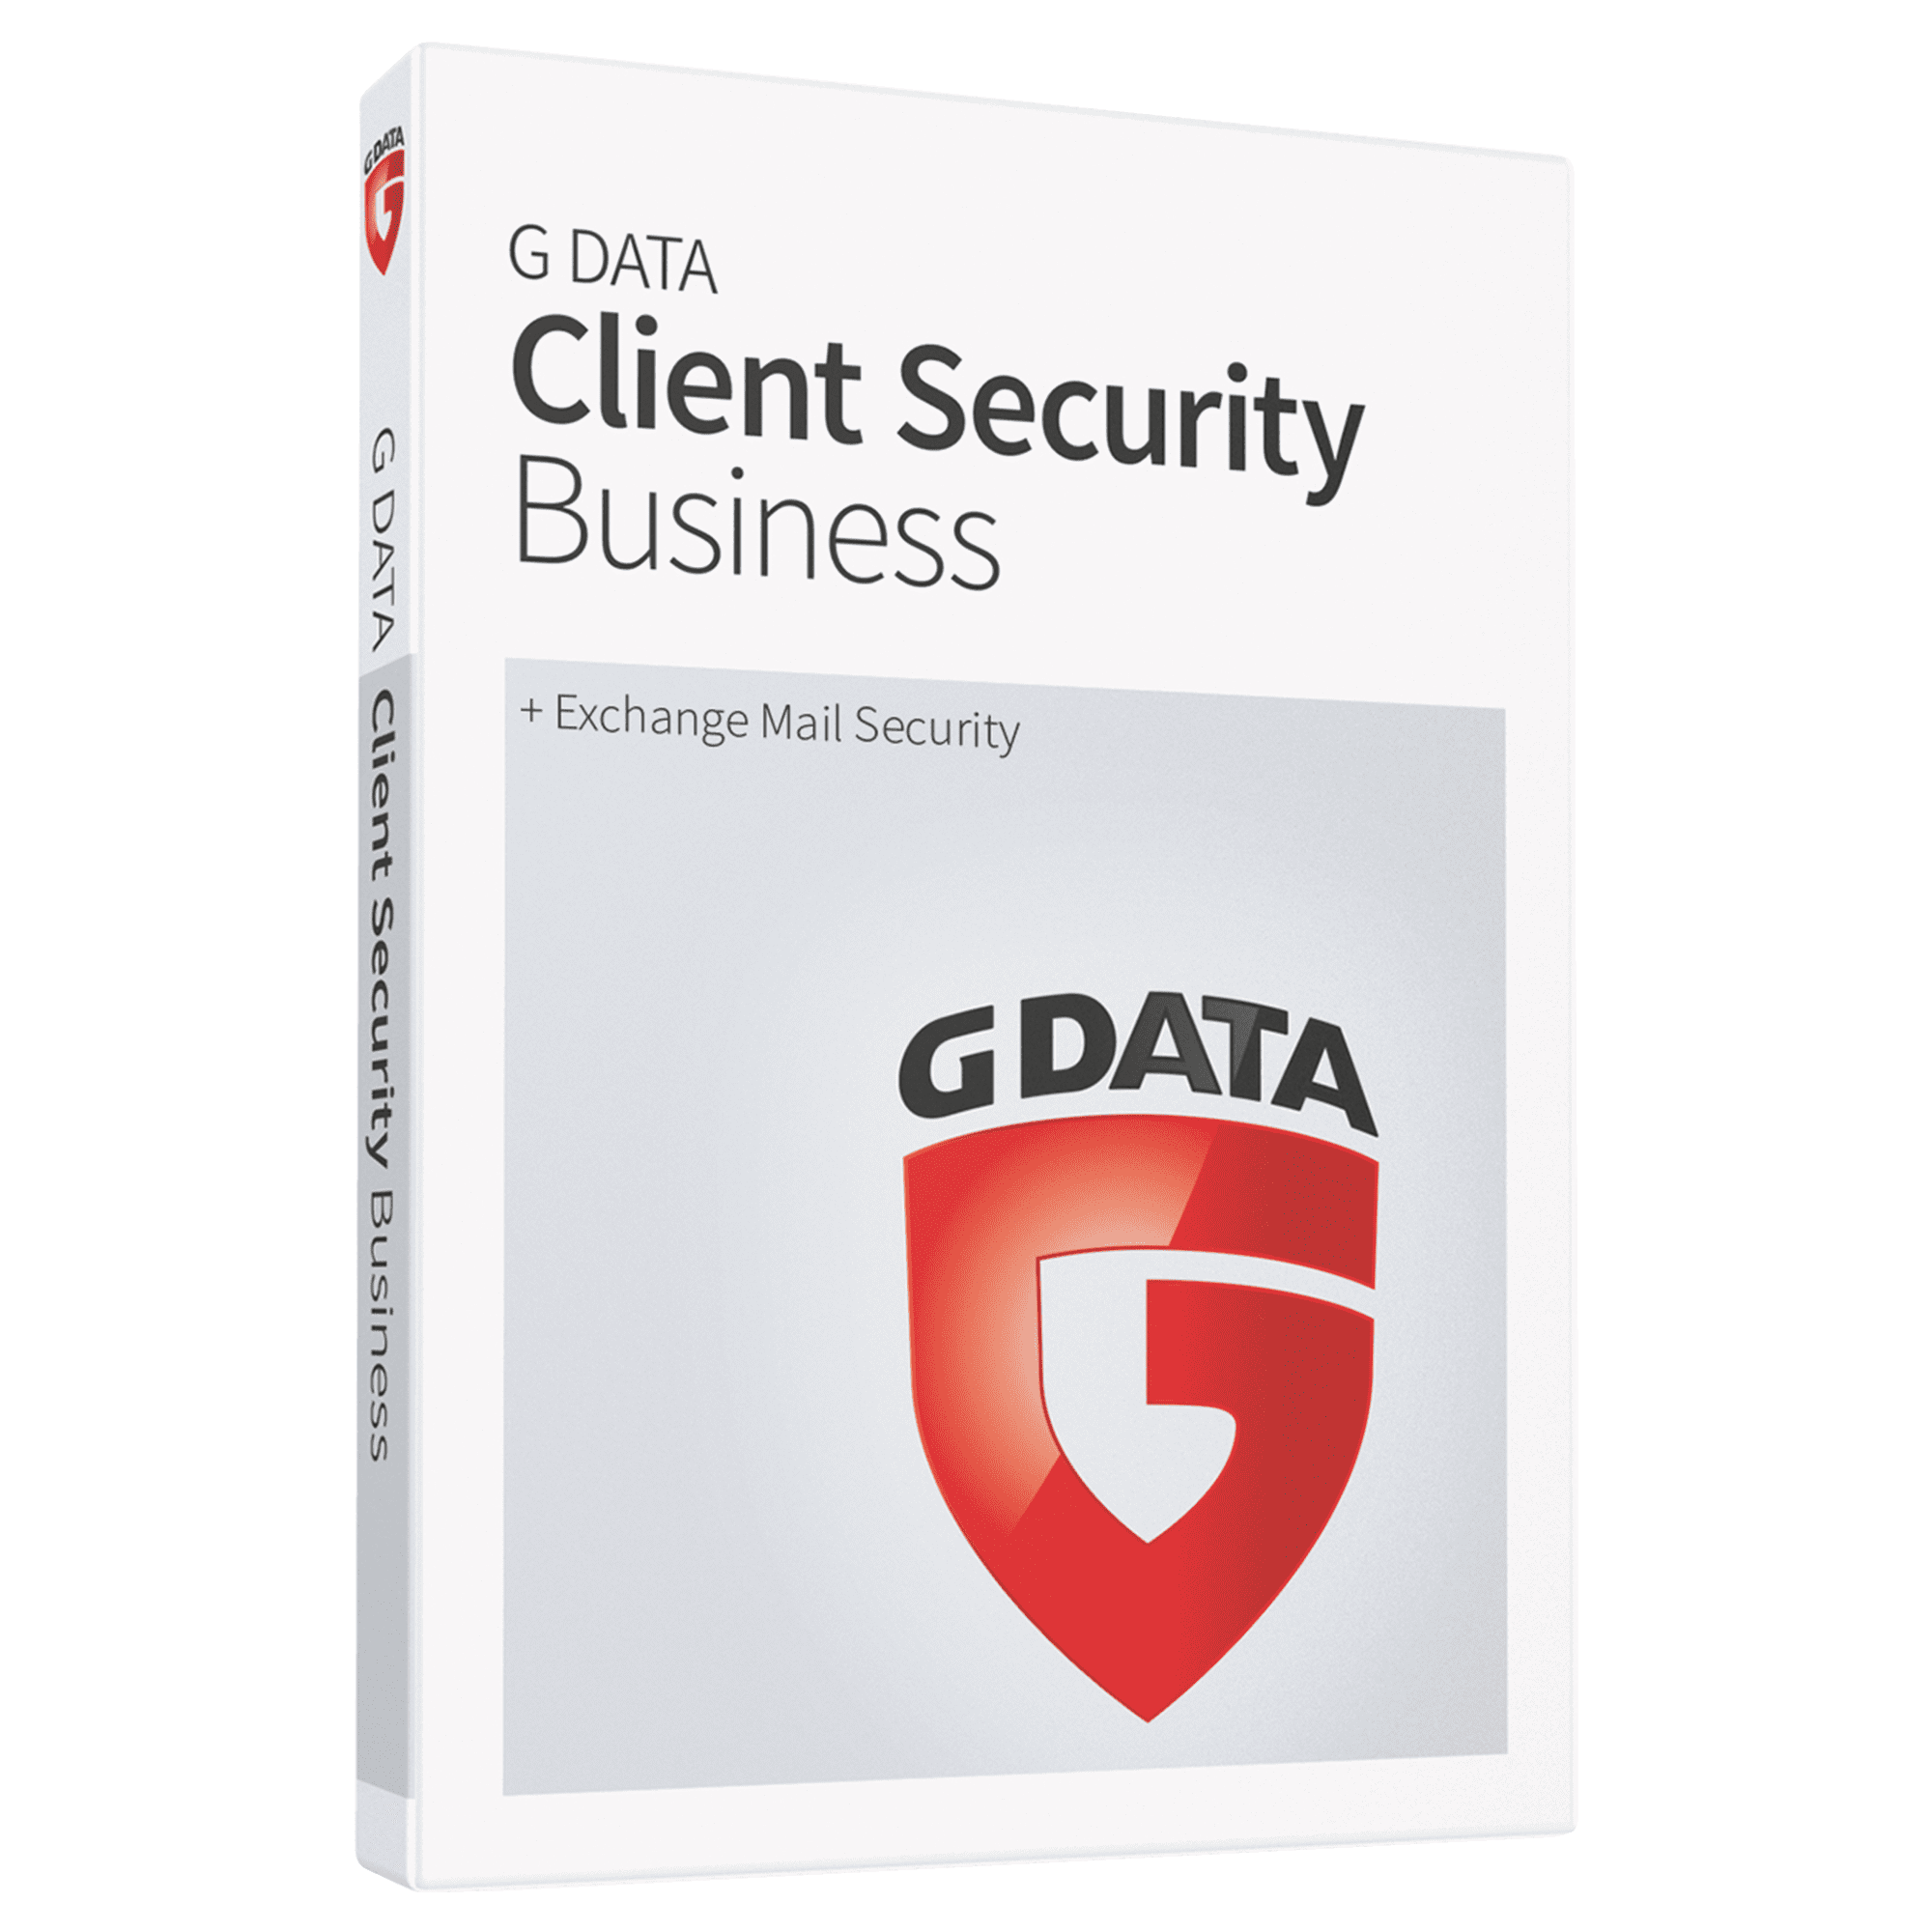 G Data Client Security Business (+ Exchange Mail Security)